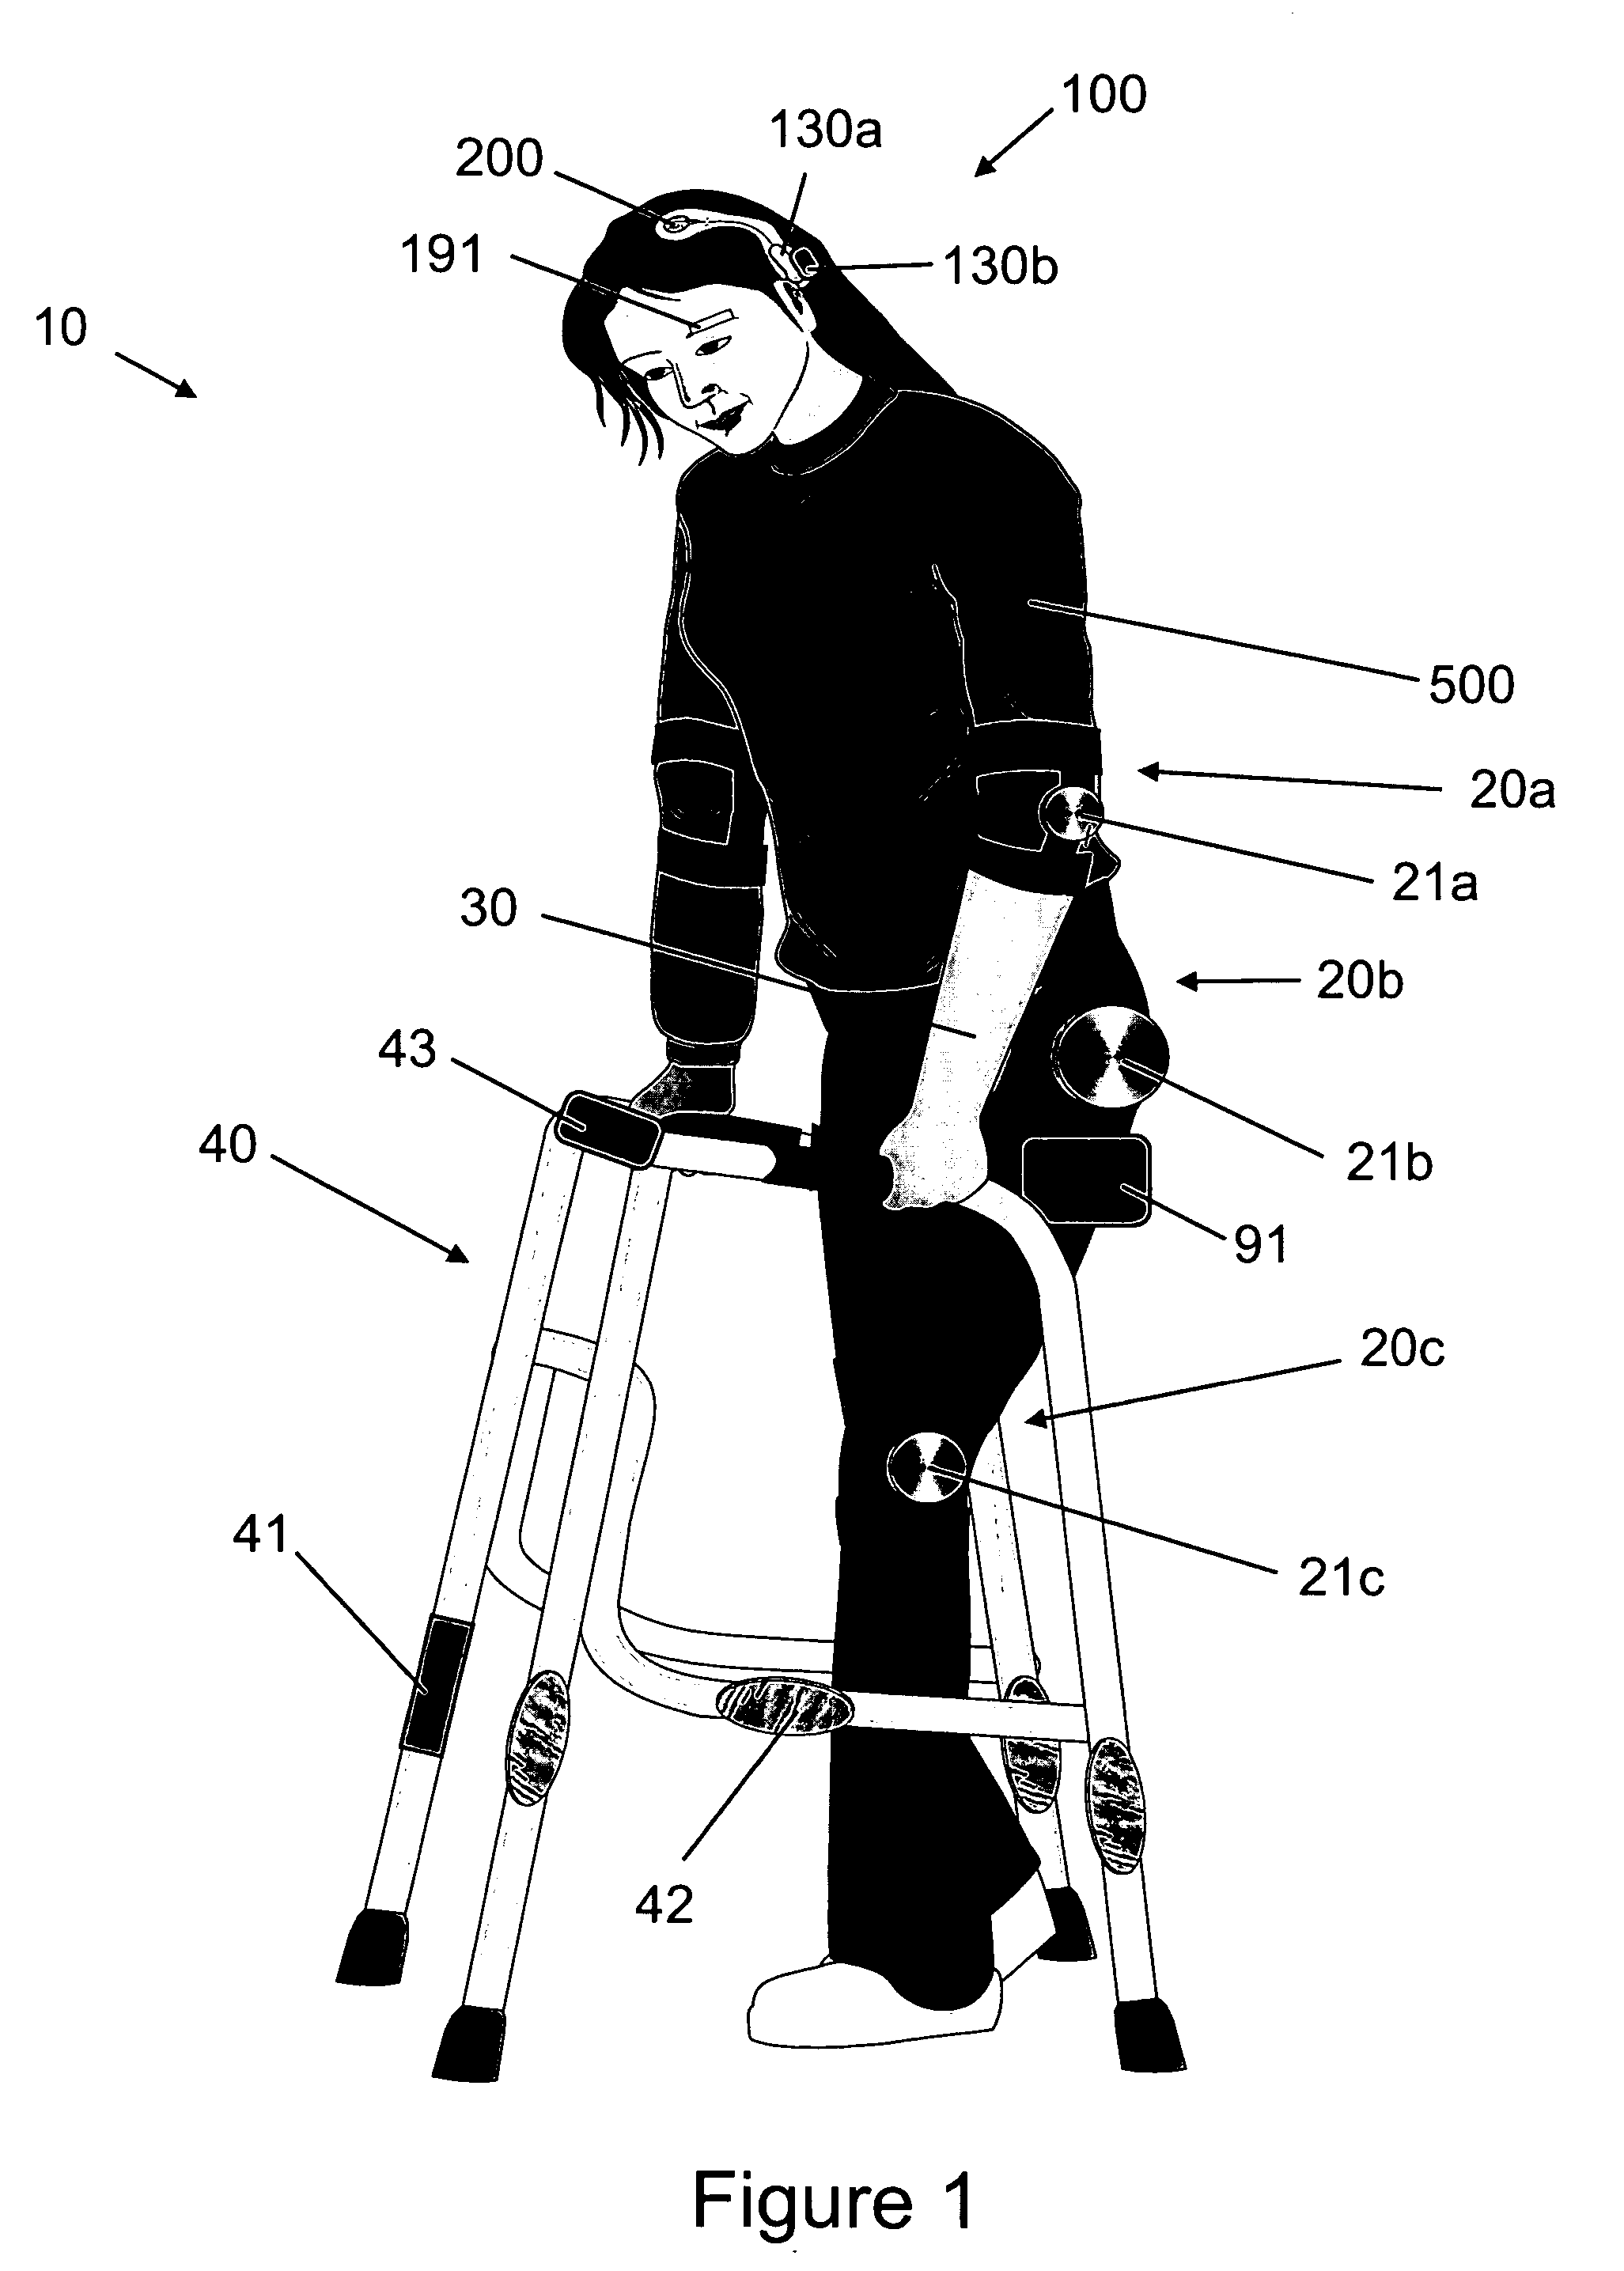 Neurally controlled patient ambulation system